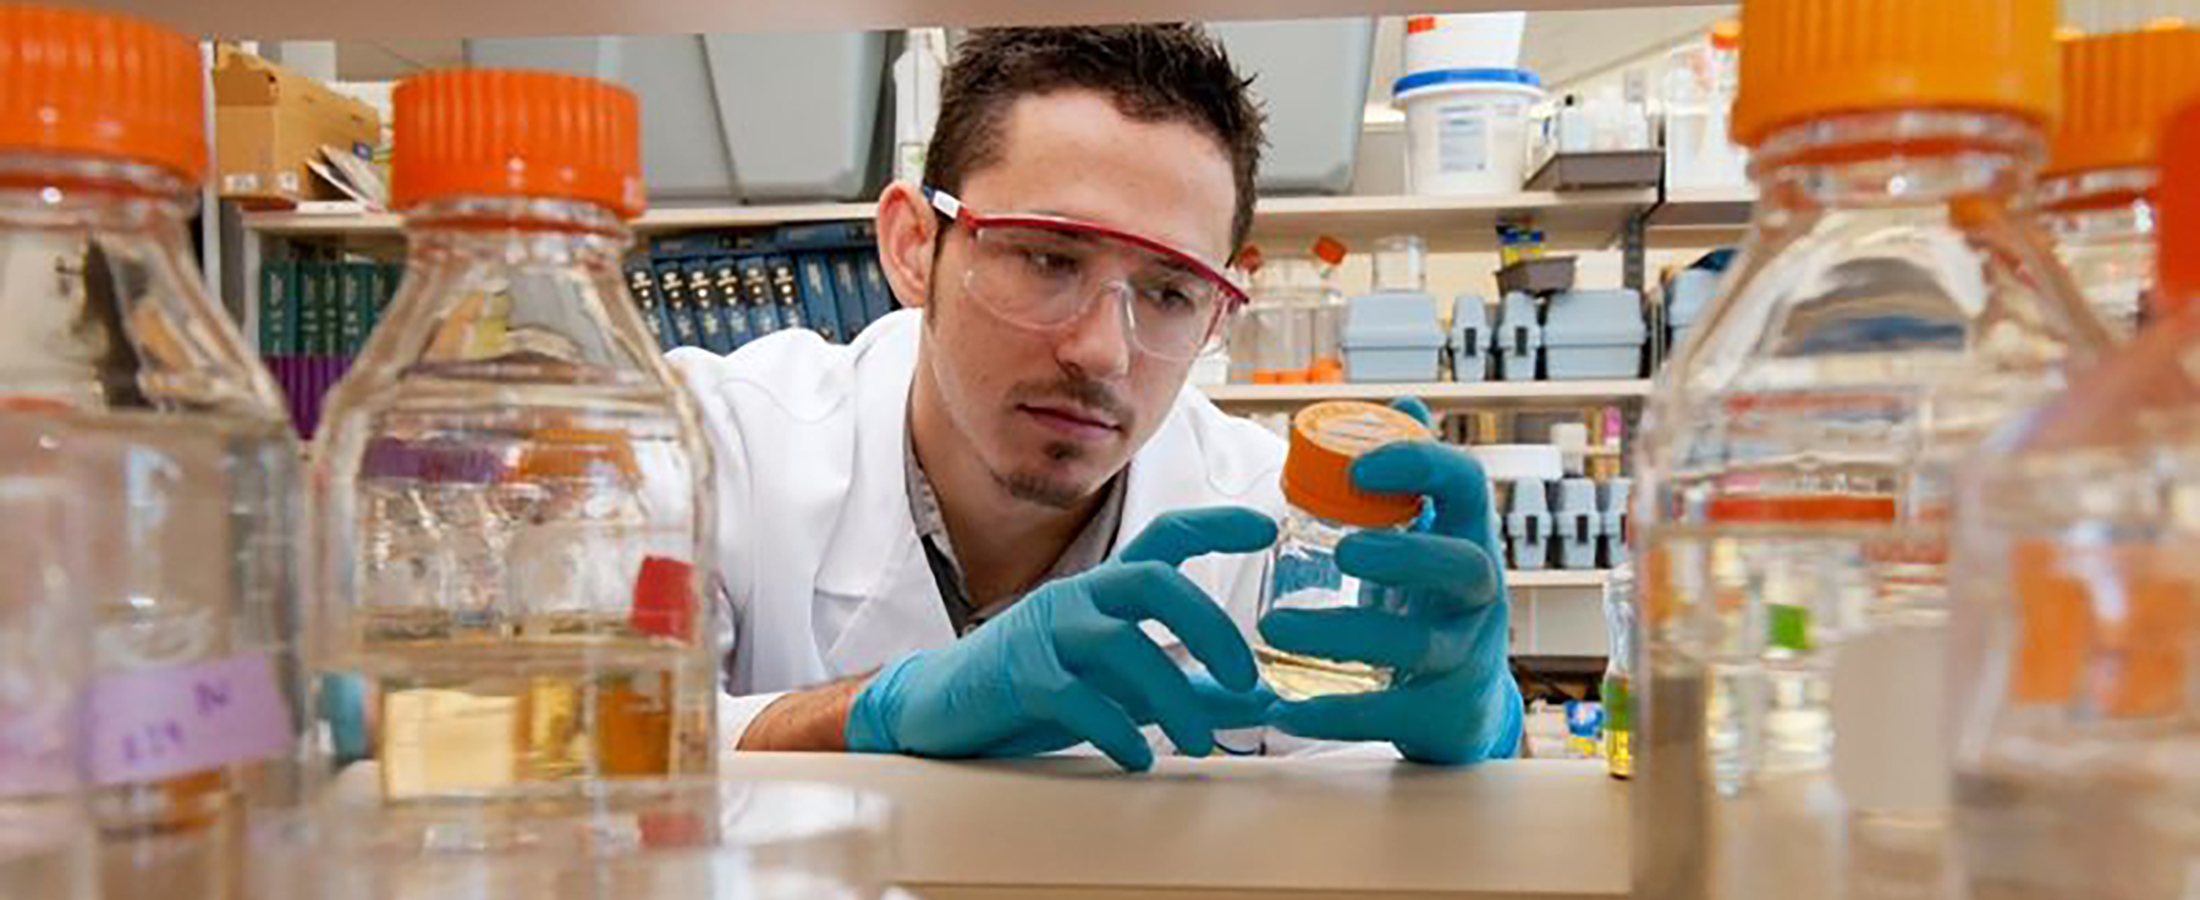 student in lab with beakers and chemicals